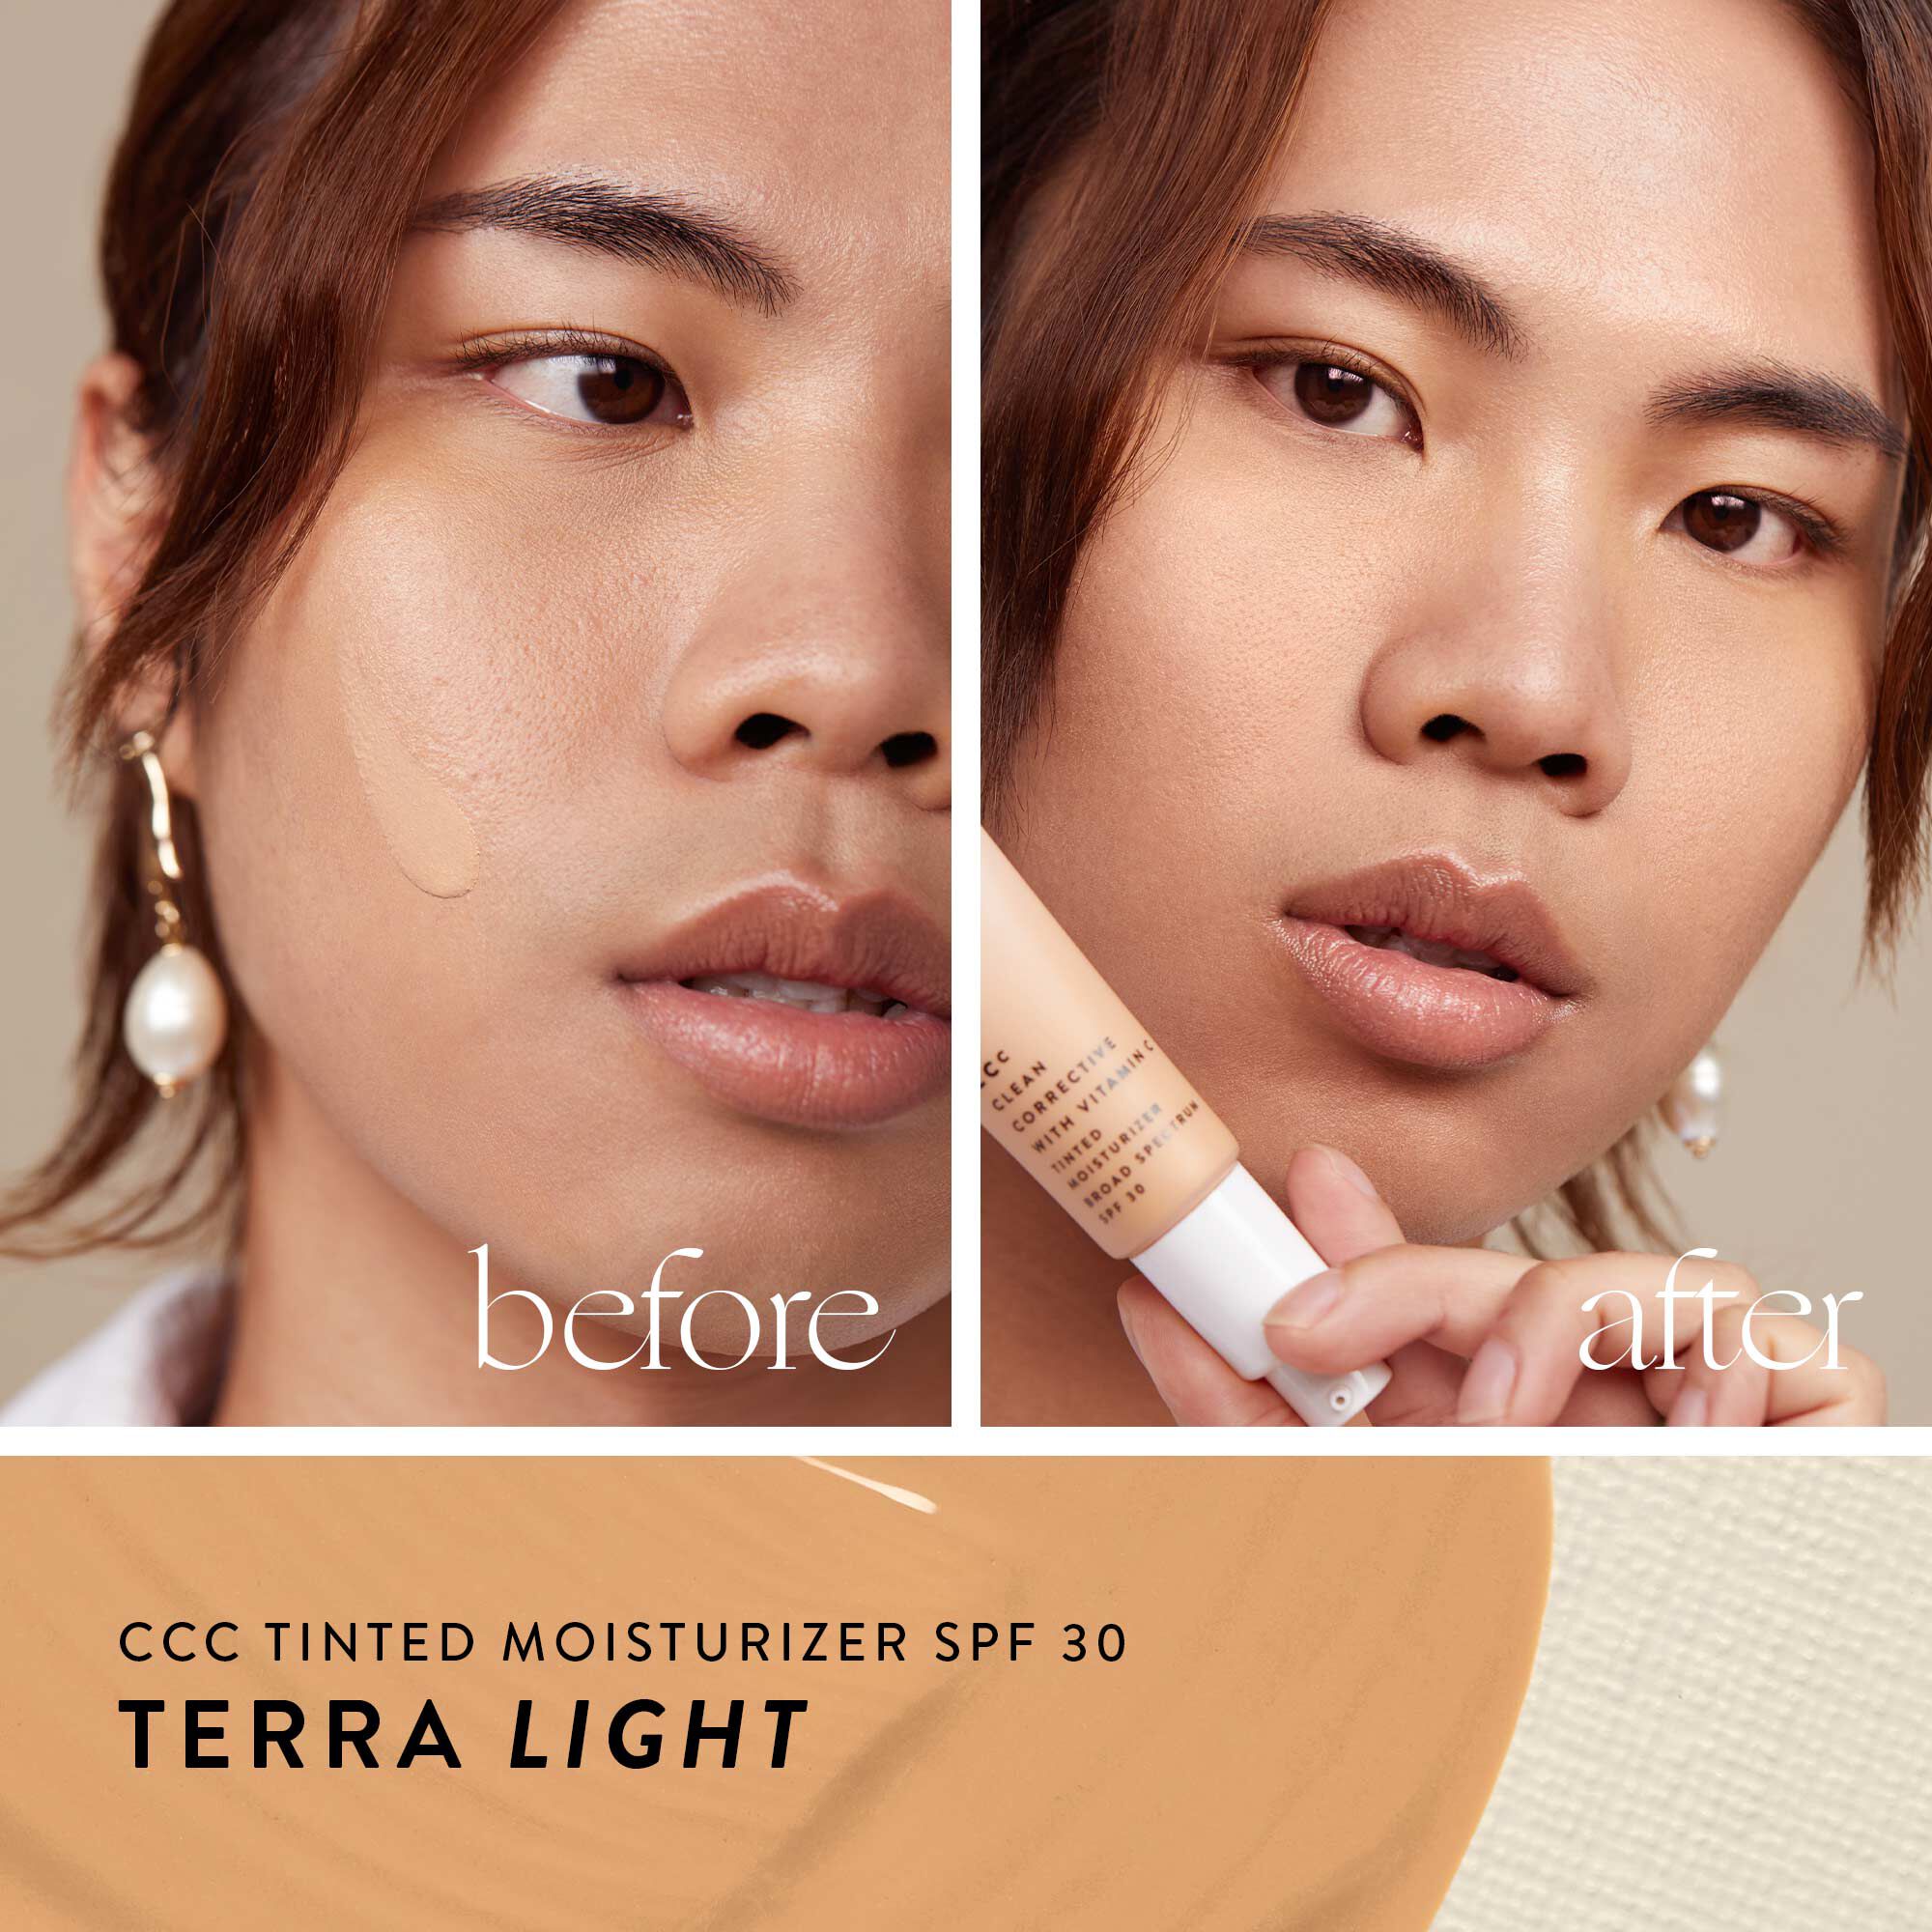 CCC Clean Corrective With Vitamin C Tinted Moisturizer Broad Spectrum SPF 30, Terra